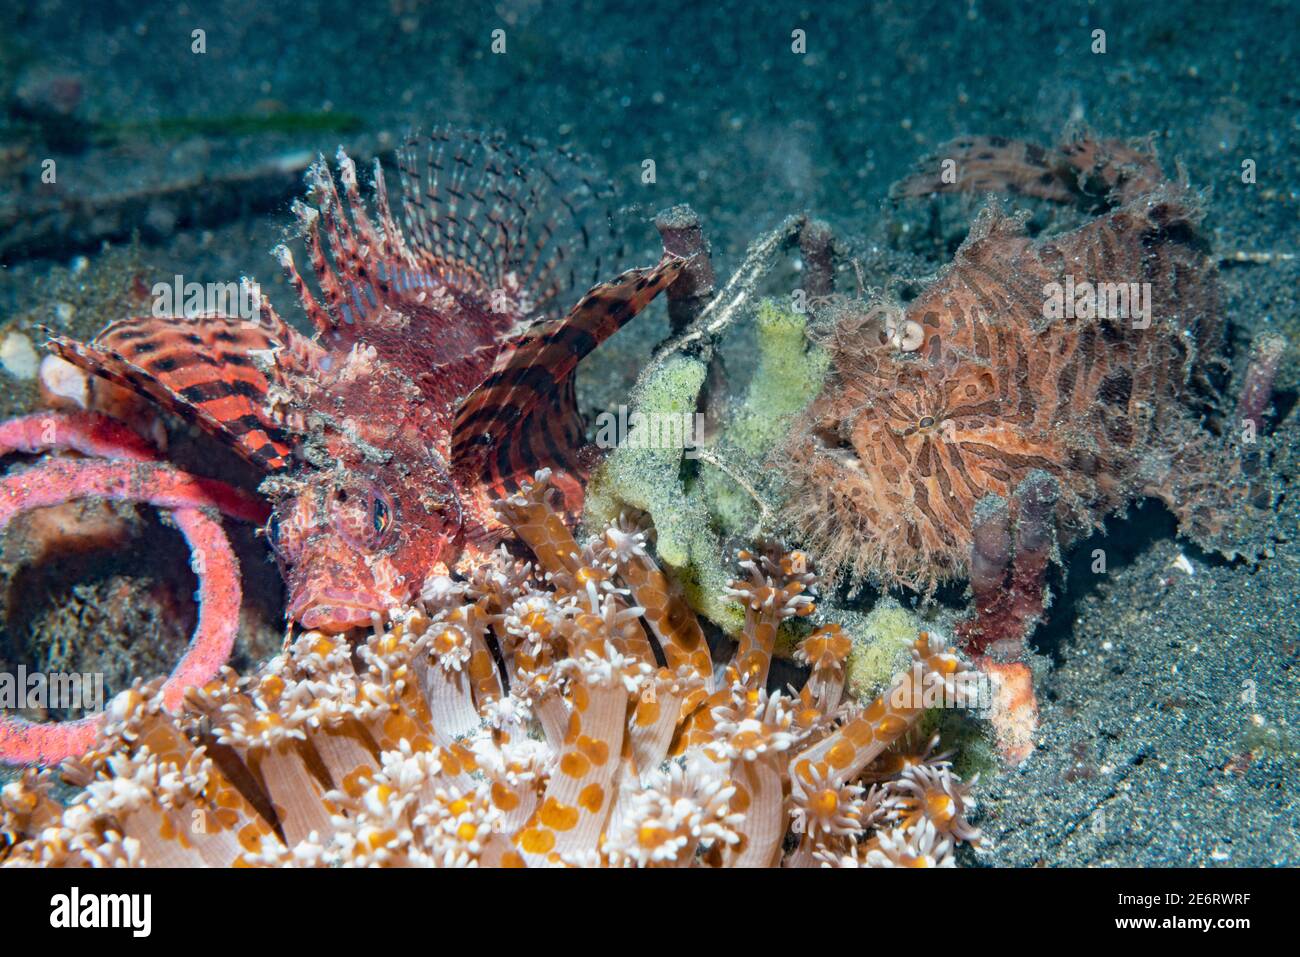 Shortfin lionfish [Dendrochirus bachypterus] and a Striped or Hairy frogfish [Antennarius striatus].   Lembeh Strait, North  Sulawesi, Indonesia. Stock Photo